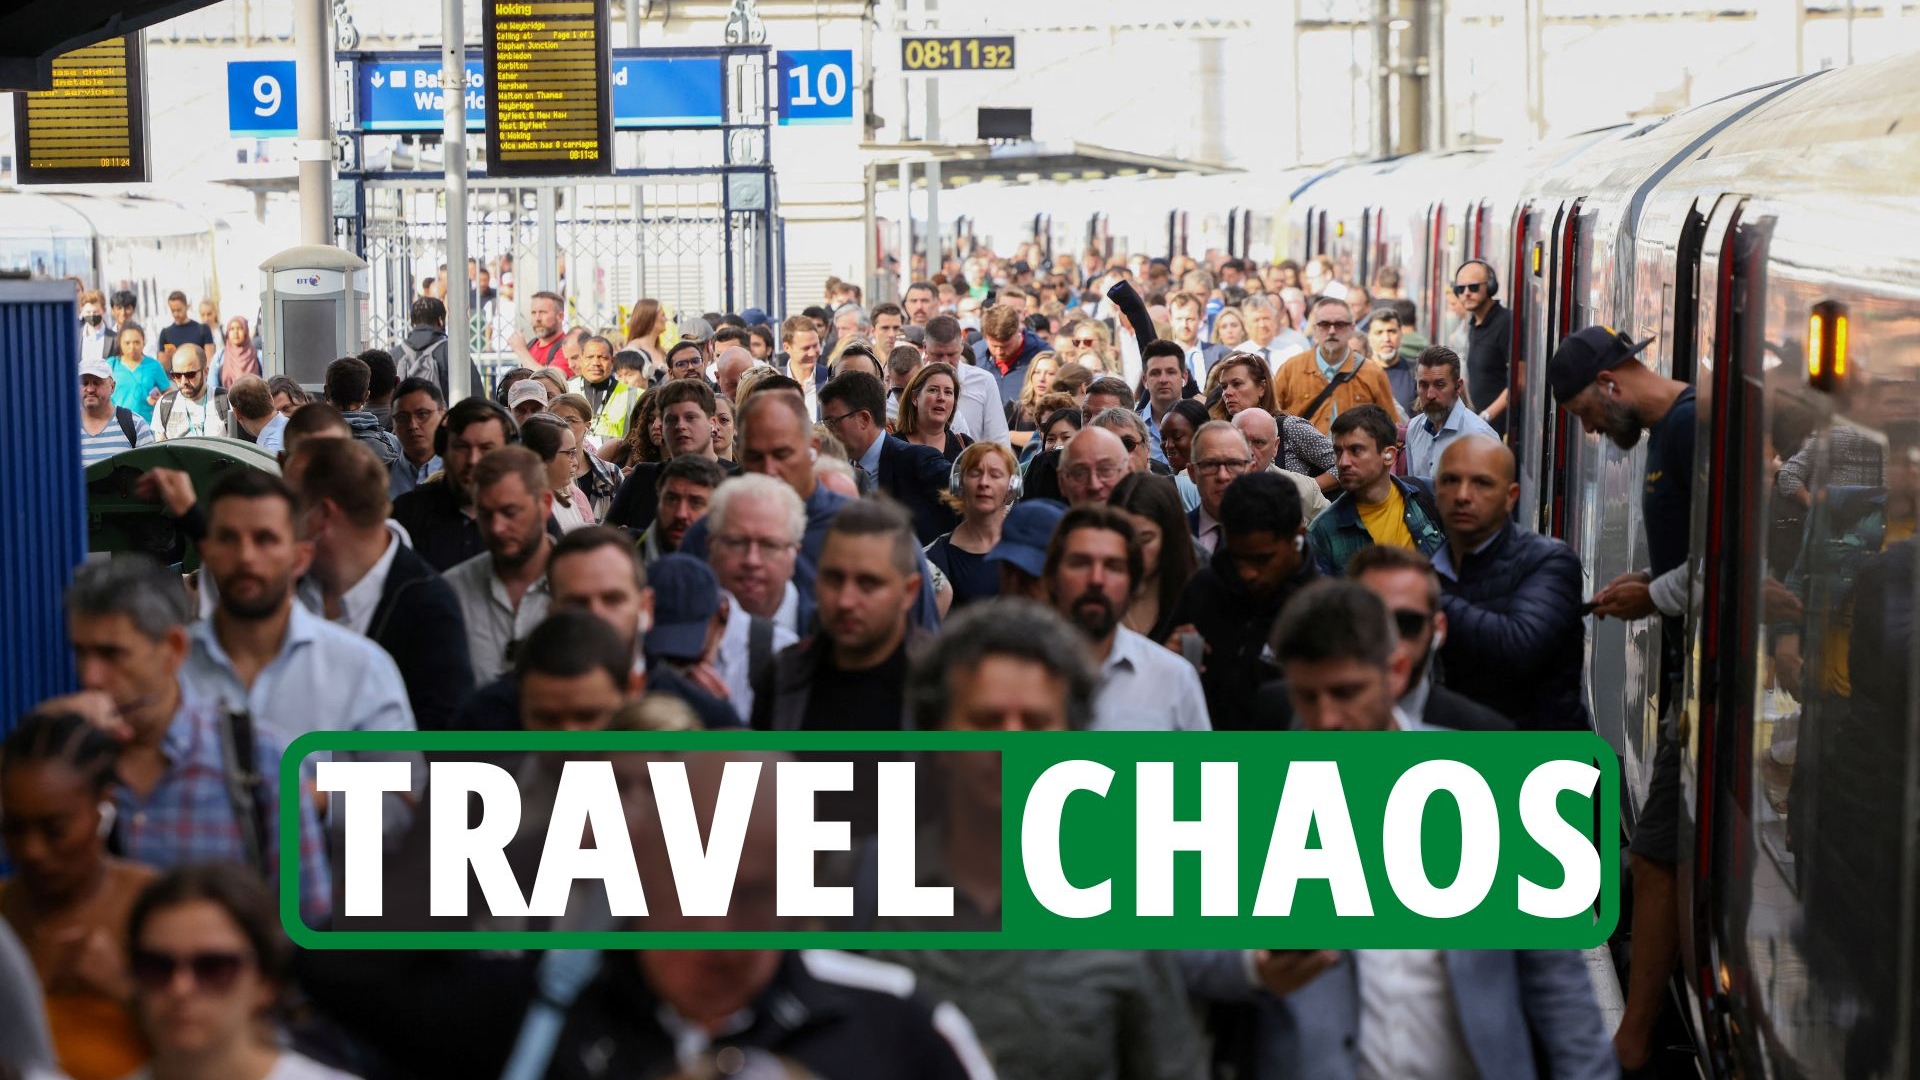 Train Chaos LATEST: Train strikes to PLUNGE Brits into ‘into uncertainty’; 1 in 5 services SCRAPPED. Plus, live flight updates